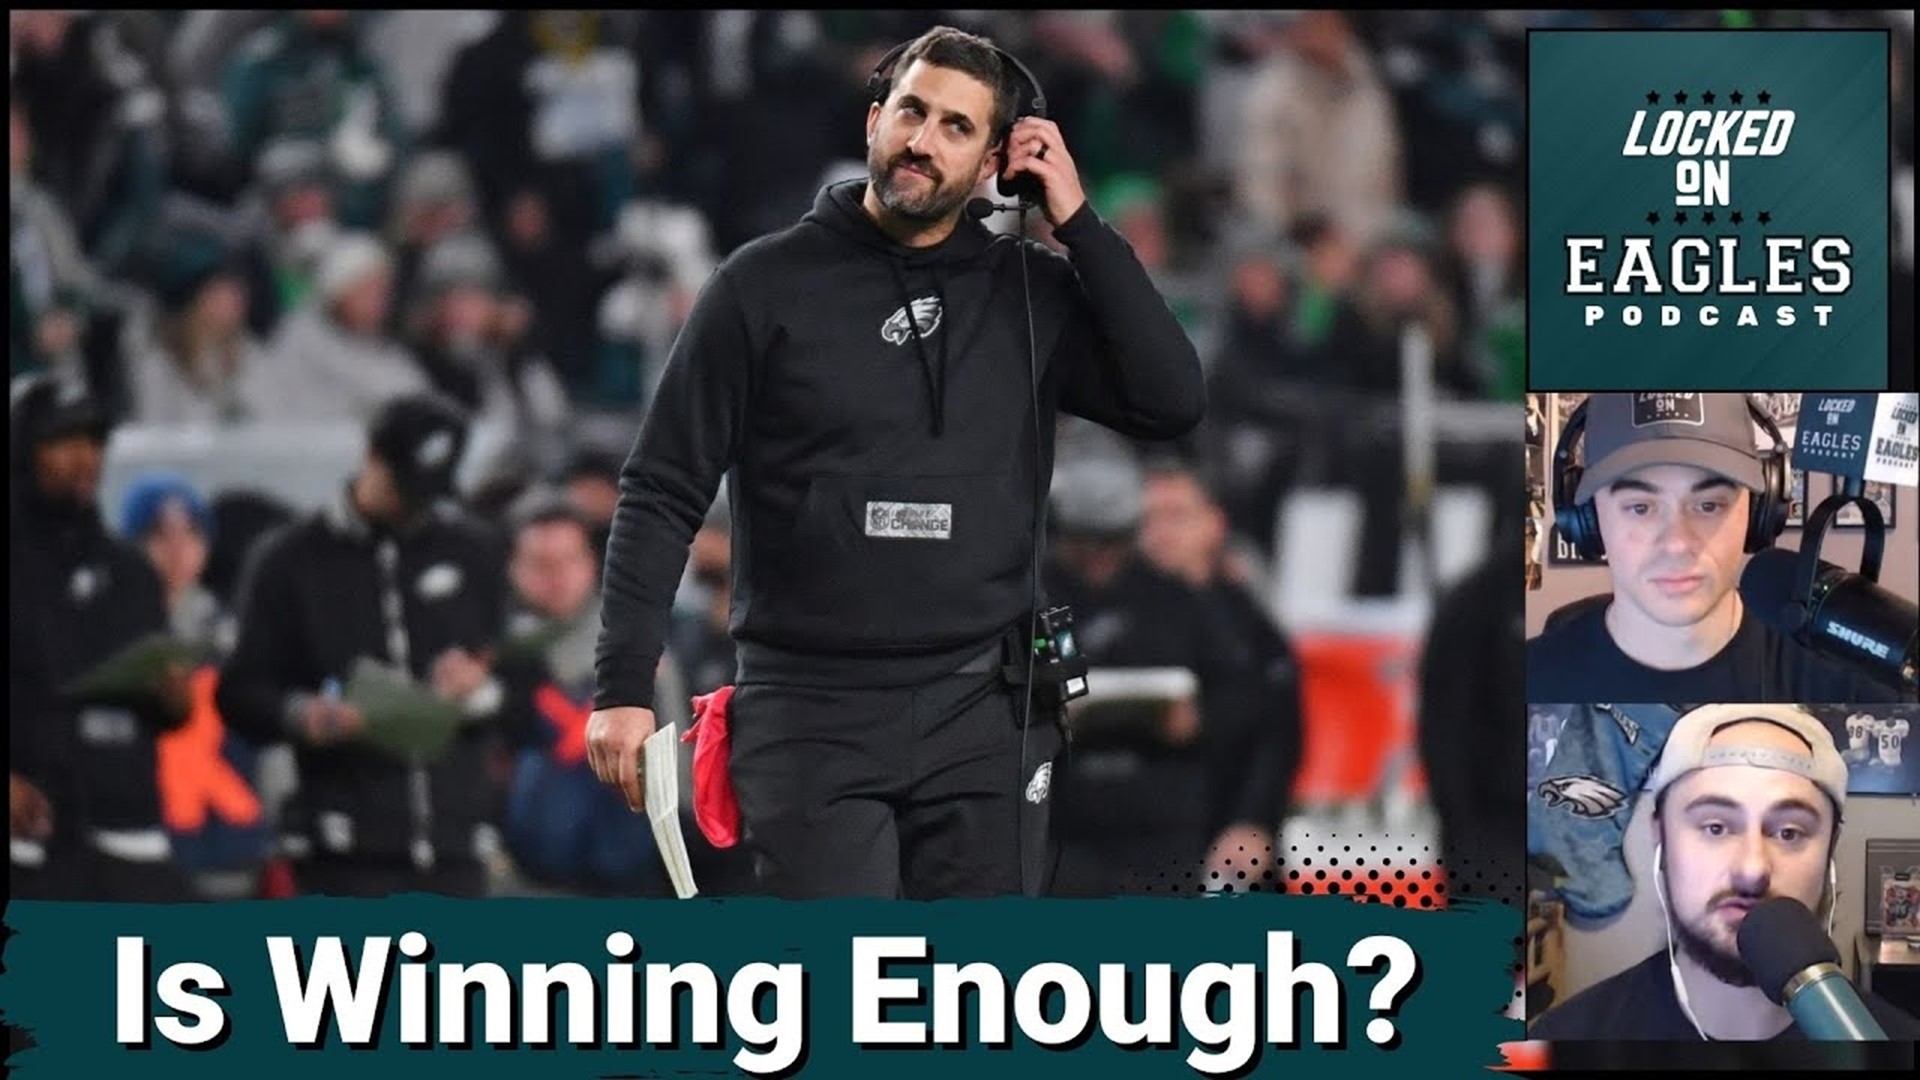 Even after picking up a victory on Christmas day over the New York Giants, the Philadelphia Eagles seem to have an offensive issue on their hands.